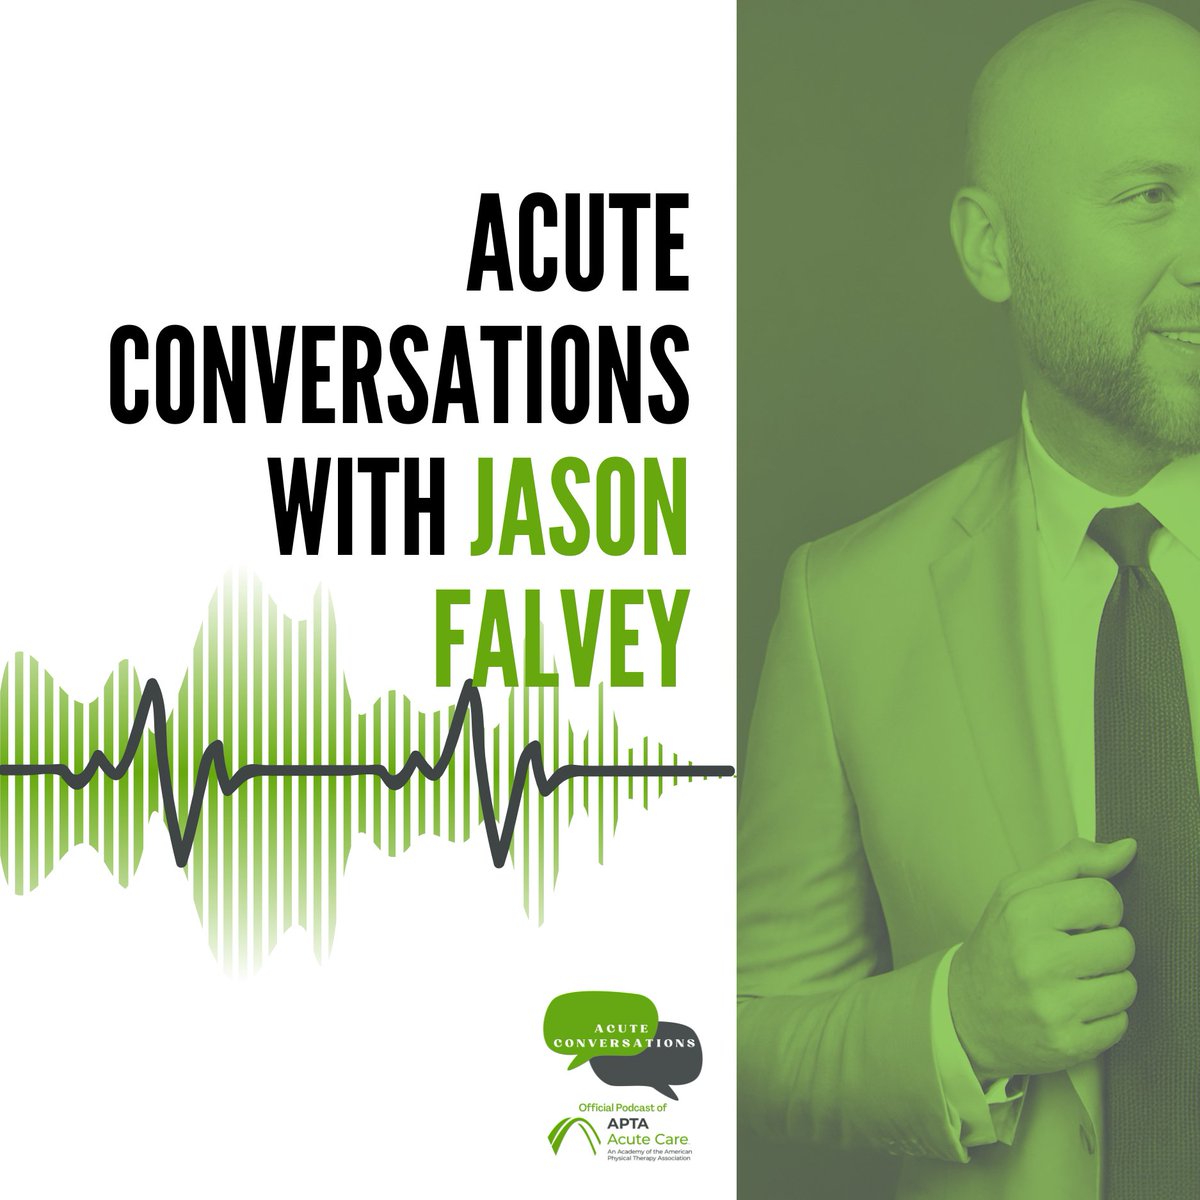 🎉 New #AcuteConversations episode out now! 🎧 Join us as @JayRayFalvey delves into the future of #AcutePT, aging in place, and overcoming systemic barriers in healthcare. 🚀 Stream here: tinyurl.com/2p9b6wzj #AgingInPlace #HealthcareInnovation #ListenNow